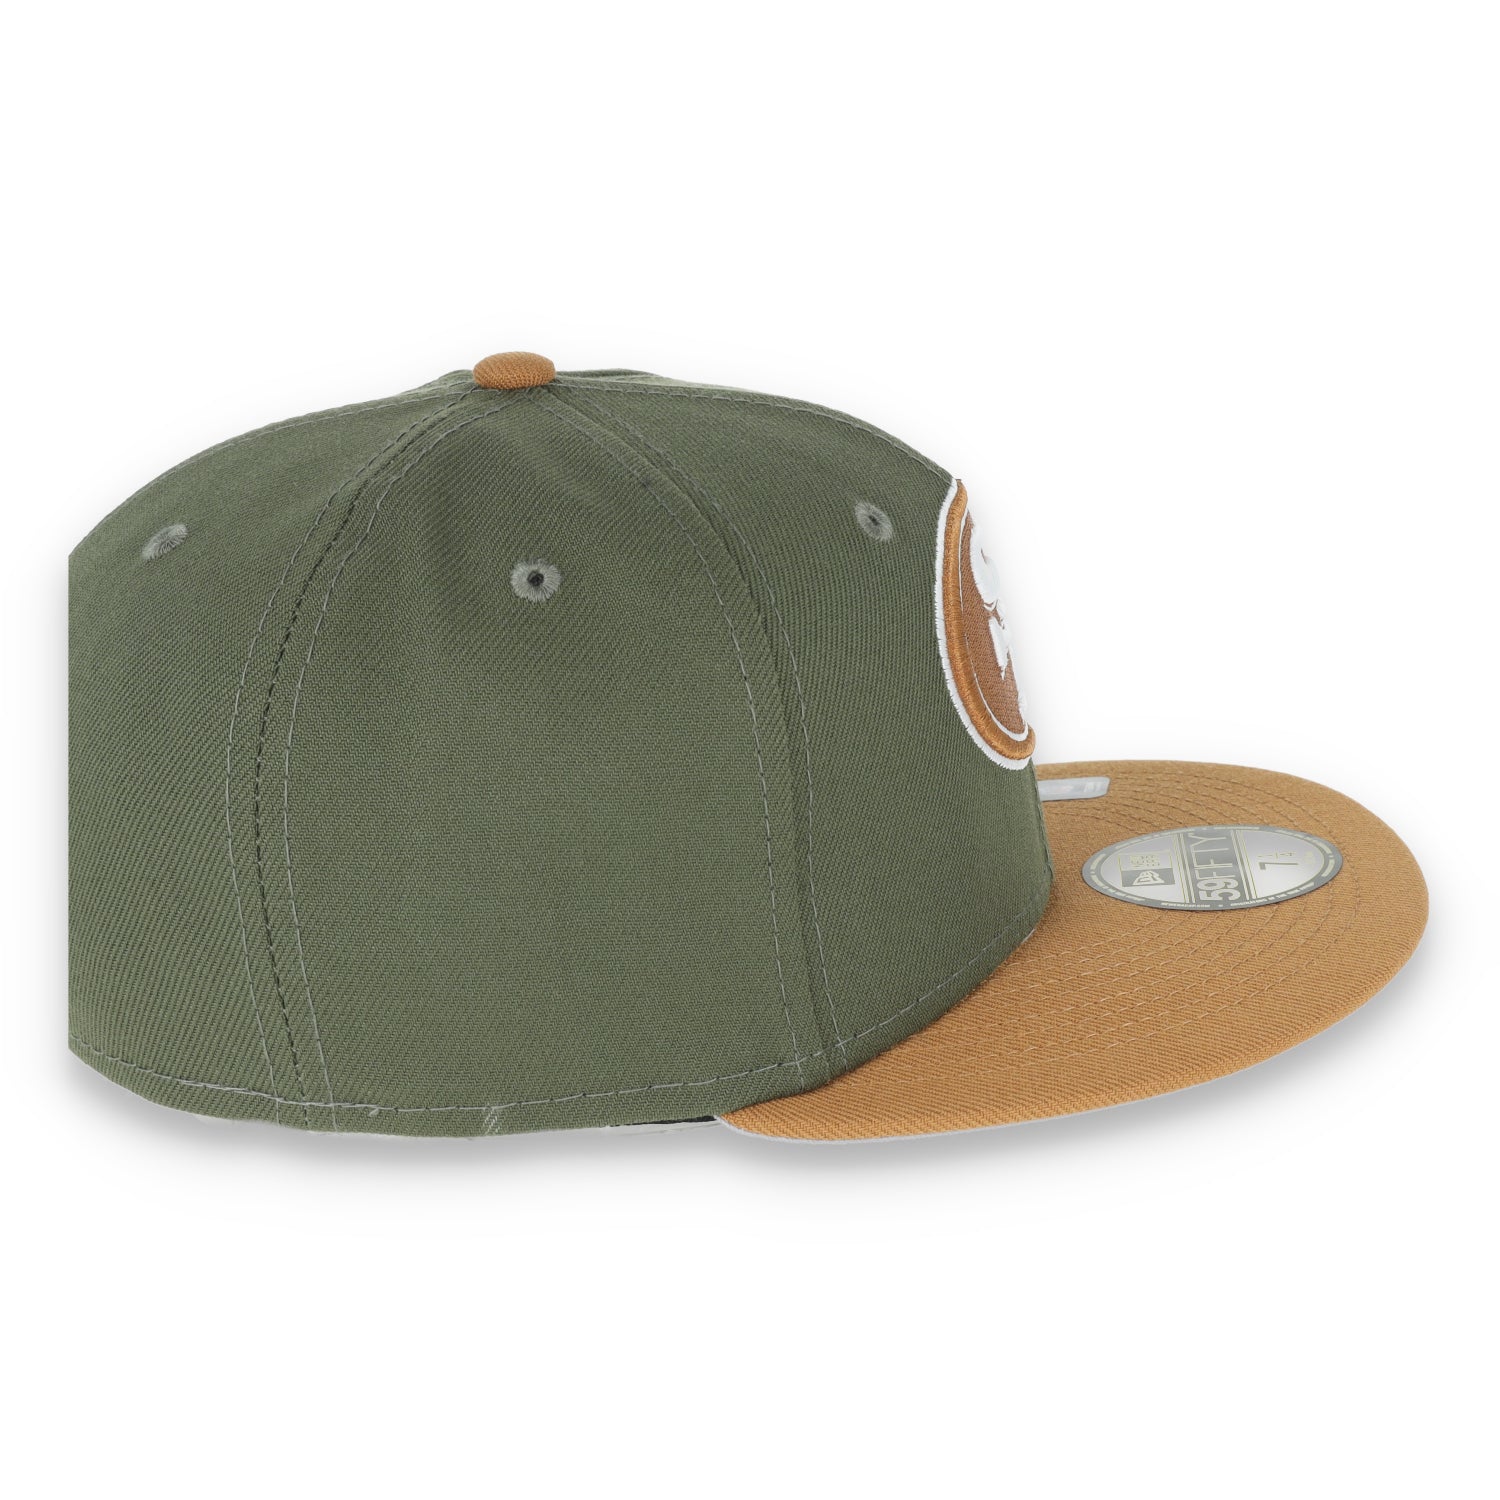 NEW ERA SAN FRANCISCO 49ERS 59FIFTY COLOR PACK FITTED -OLIVE/TAN